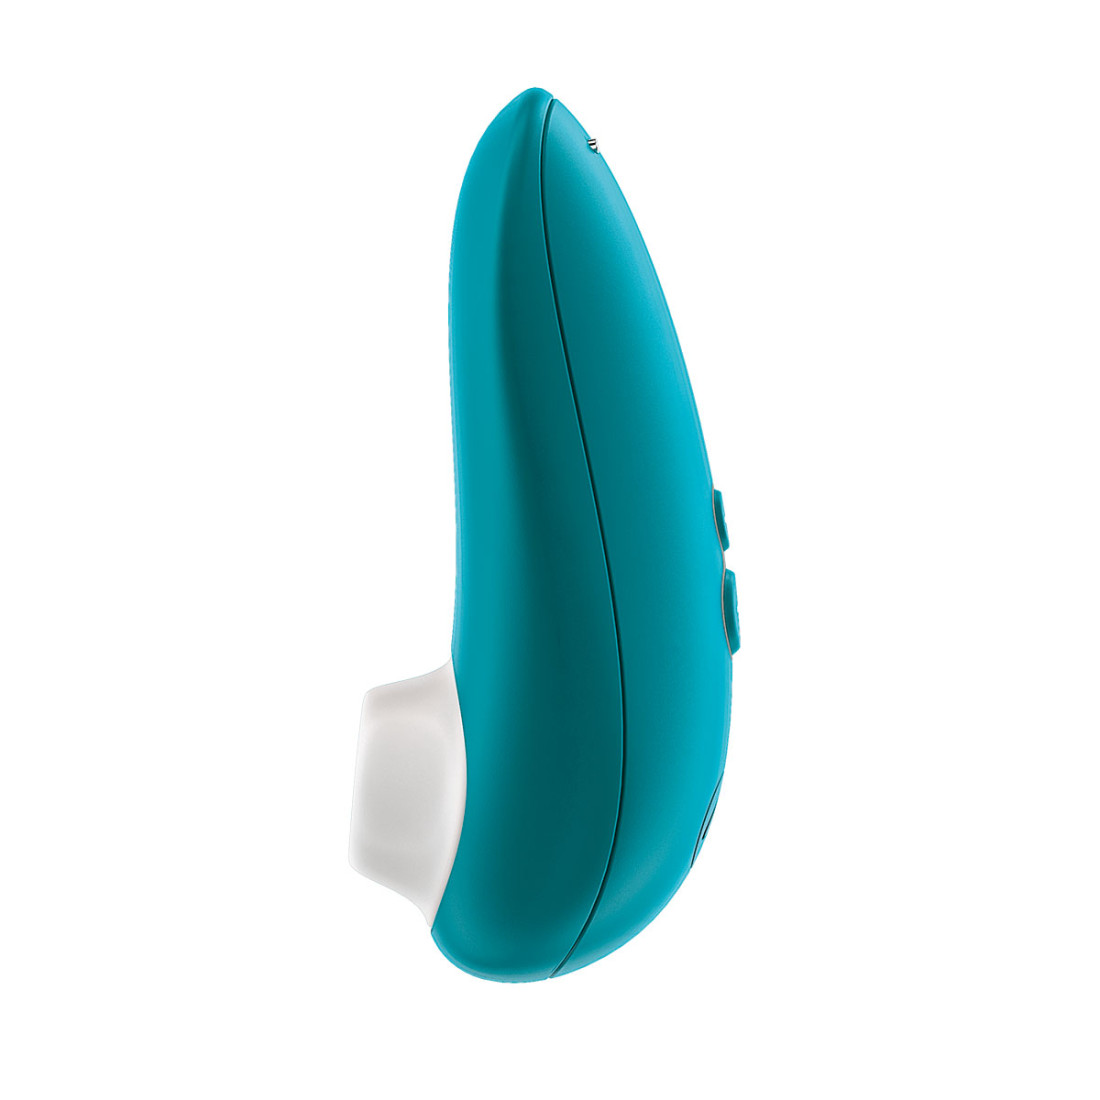 Womanizer Starlet 2 Review